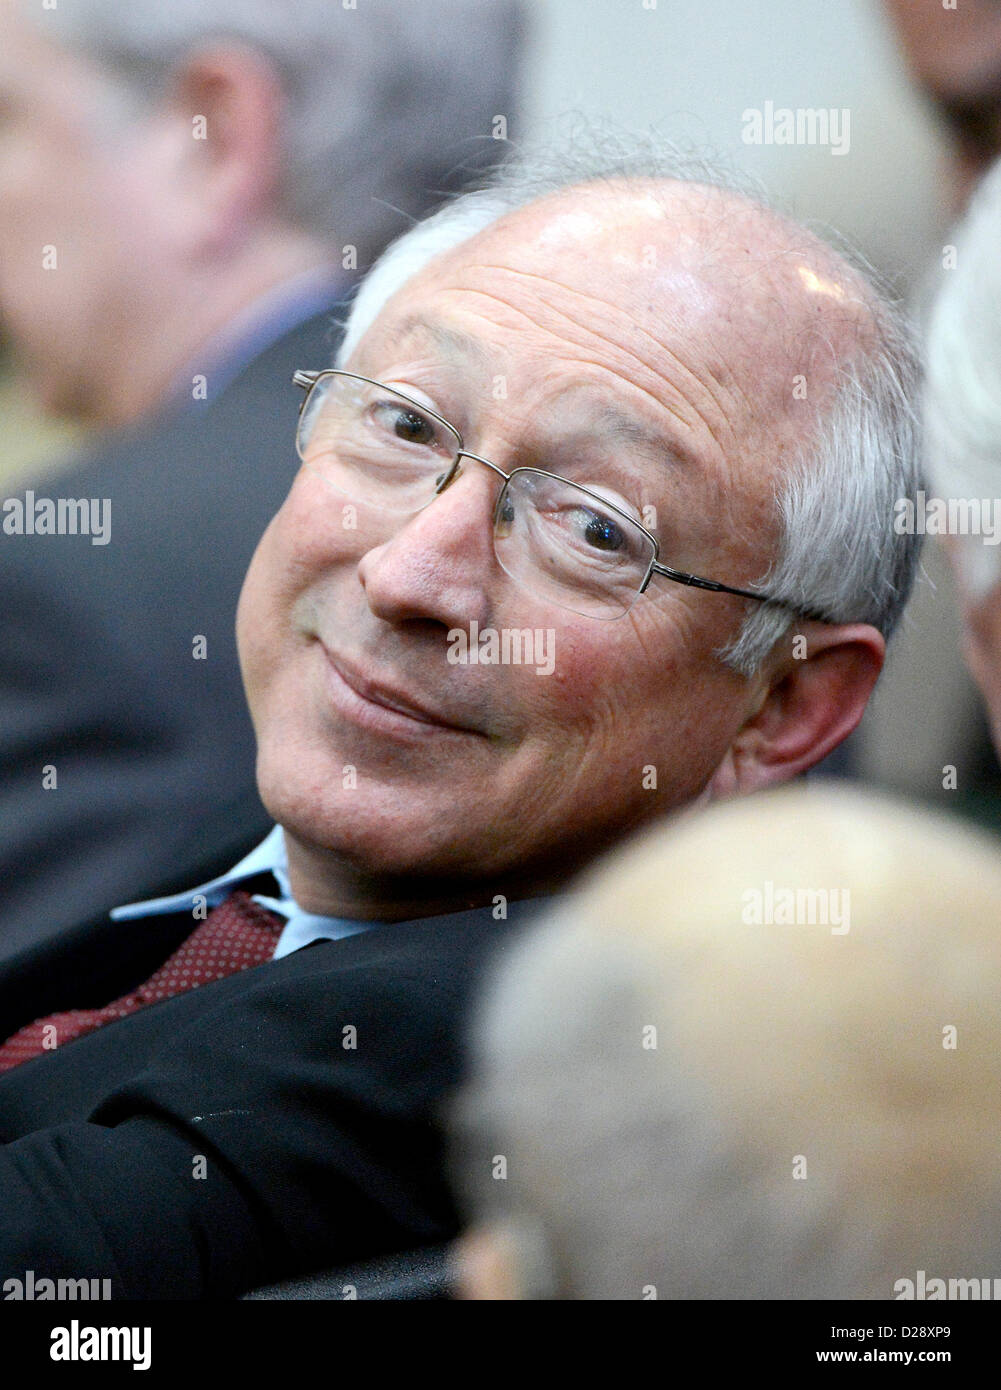 United States Secretary of the Interior Ken Salazar attends the remarks of U.S. President Barack Obama and Vice President Joe Biden at an event at the White House in Washington, D.C. to unveil a set of proposals to reduce gun violence on Wednesday, January 16, 2012. It was announced earlier in the day Salazar was leaving his post to return to his native Colorado..Credit: Ron Sachs / CNP Stock Photo